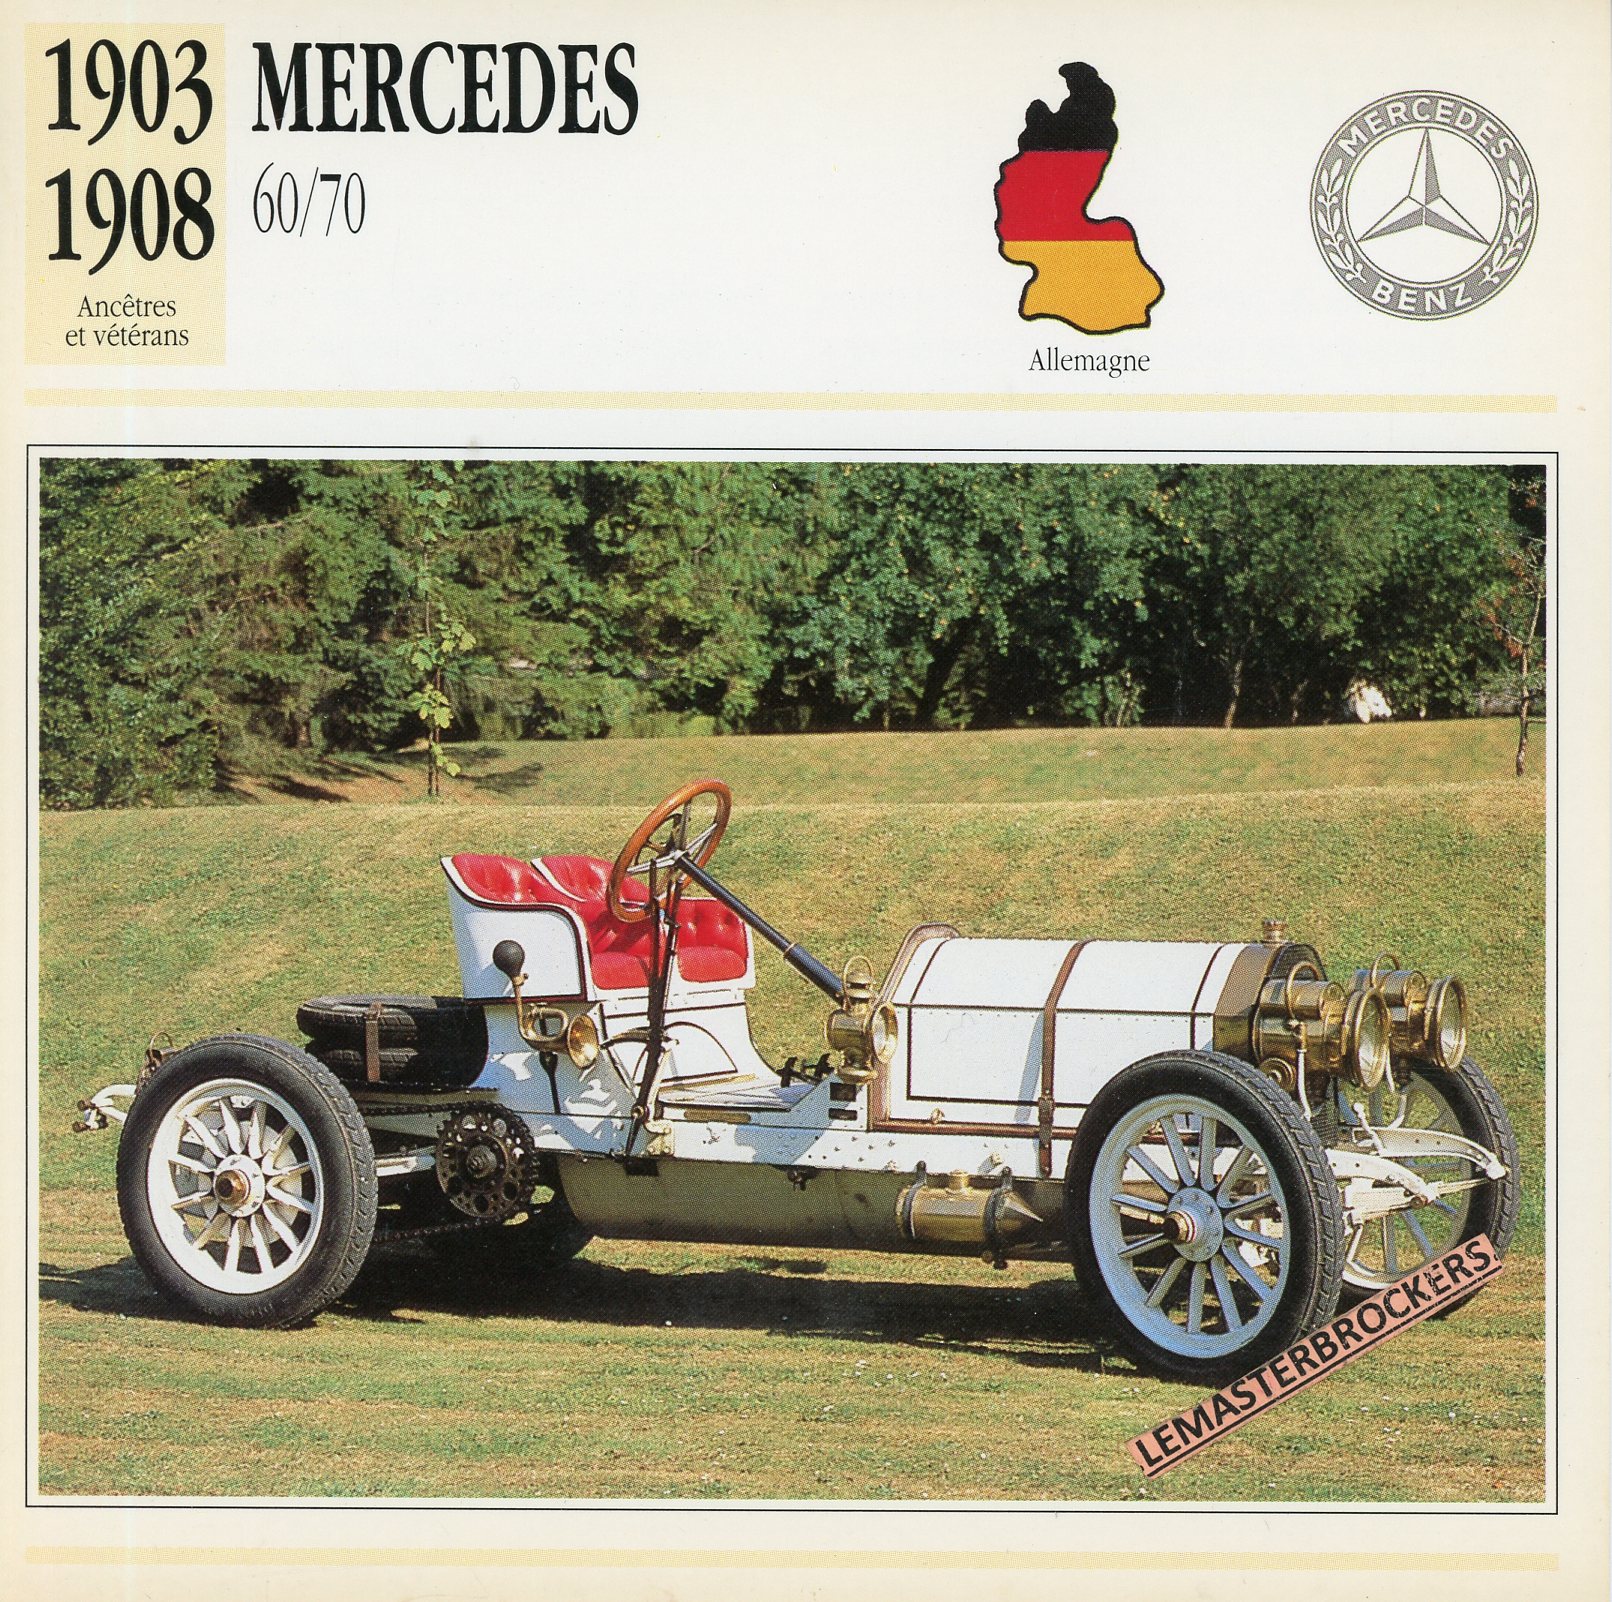 FICHE-AUTO-MERCEDES-60-70-1903-1908-LEMASTERBROCKERS-CARS-CARD